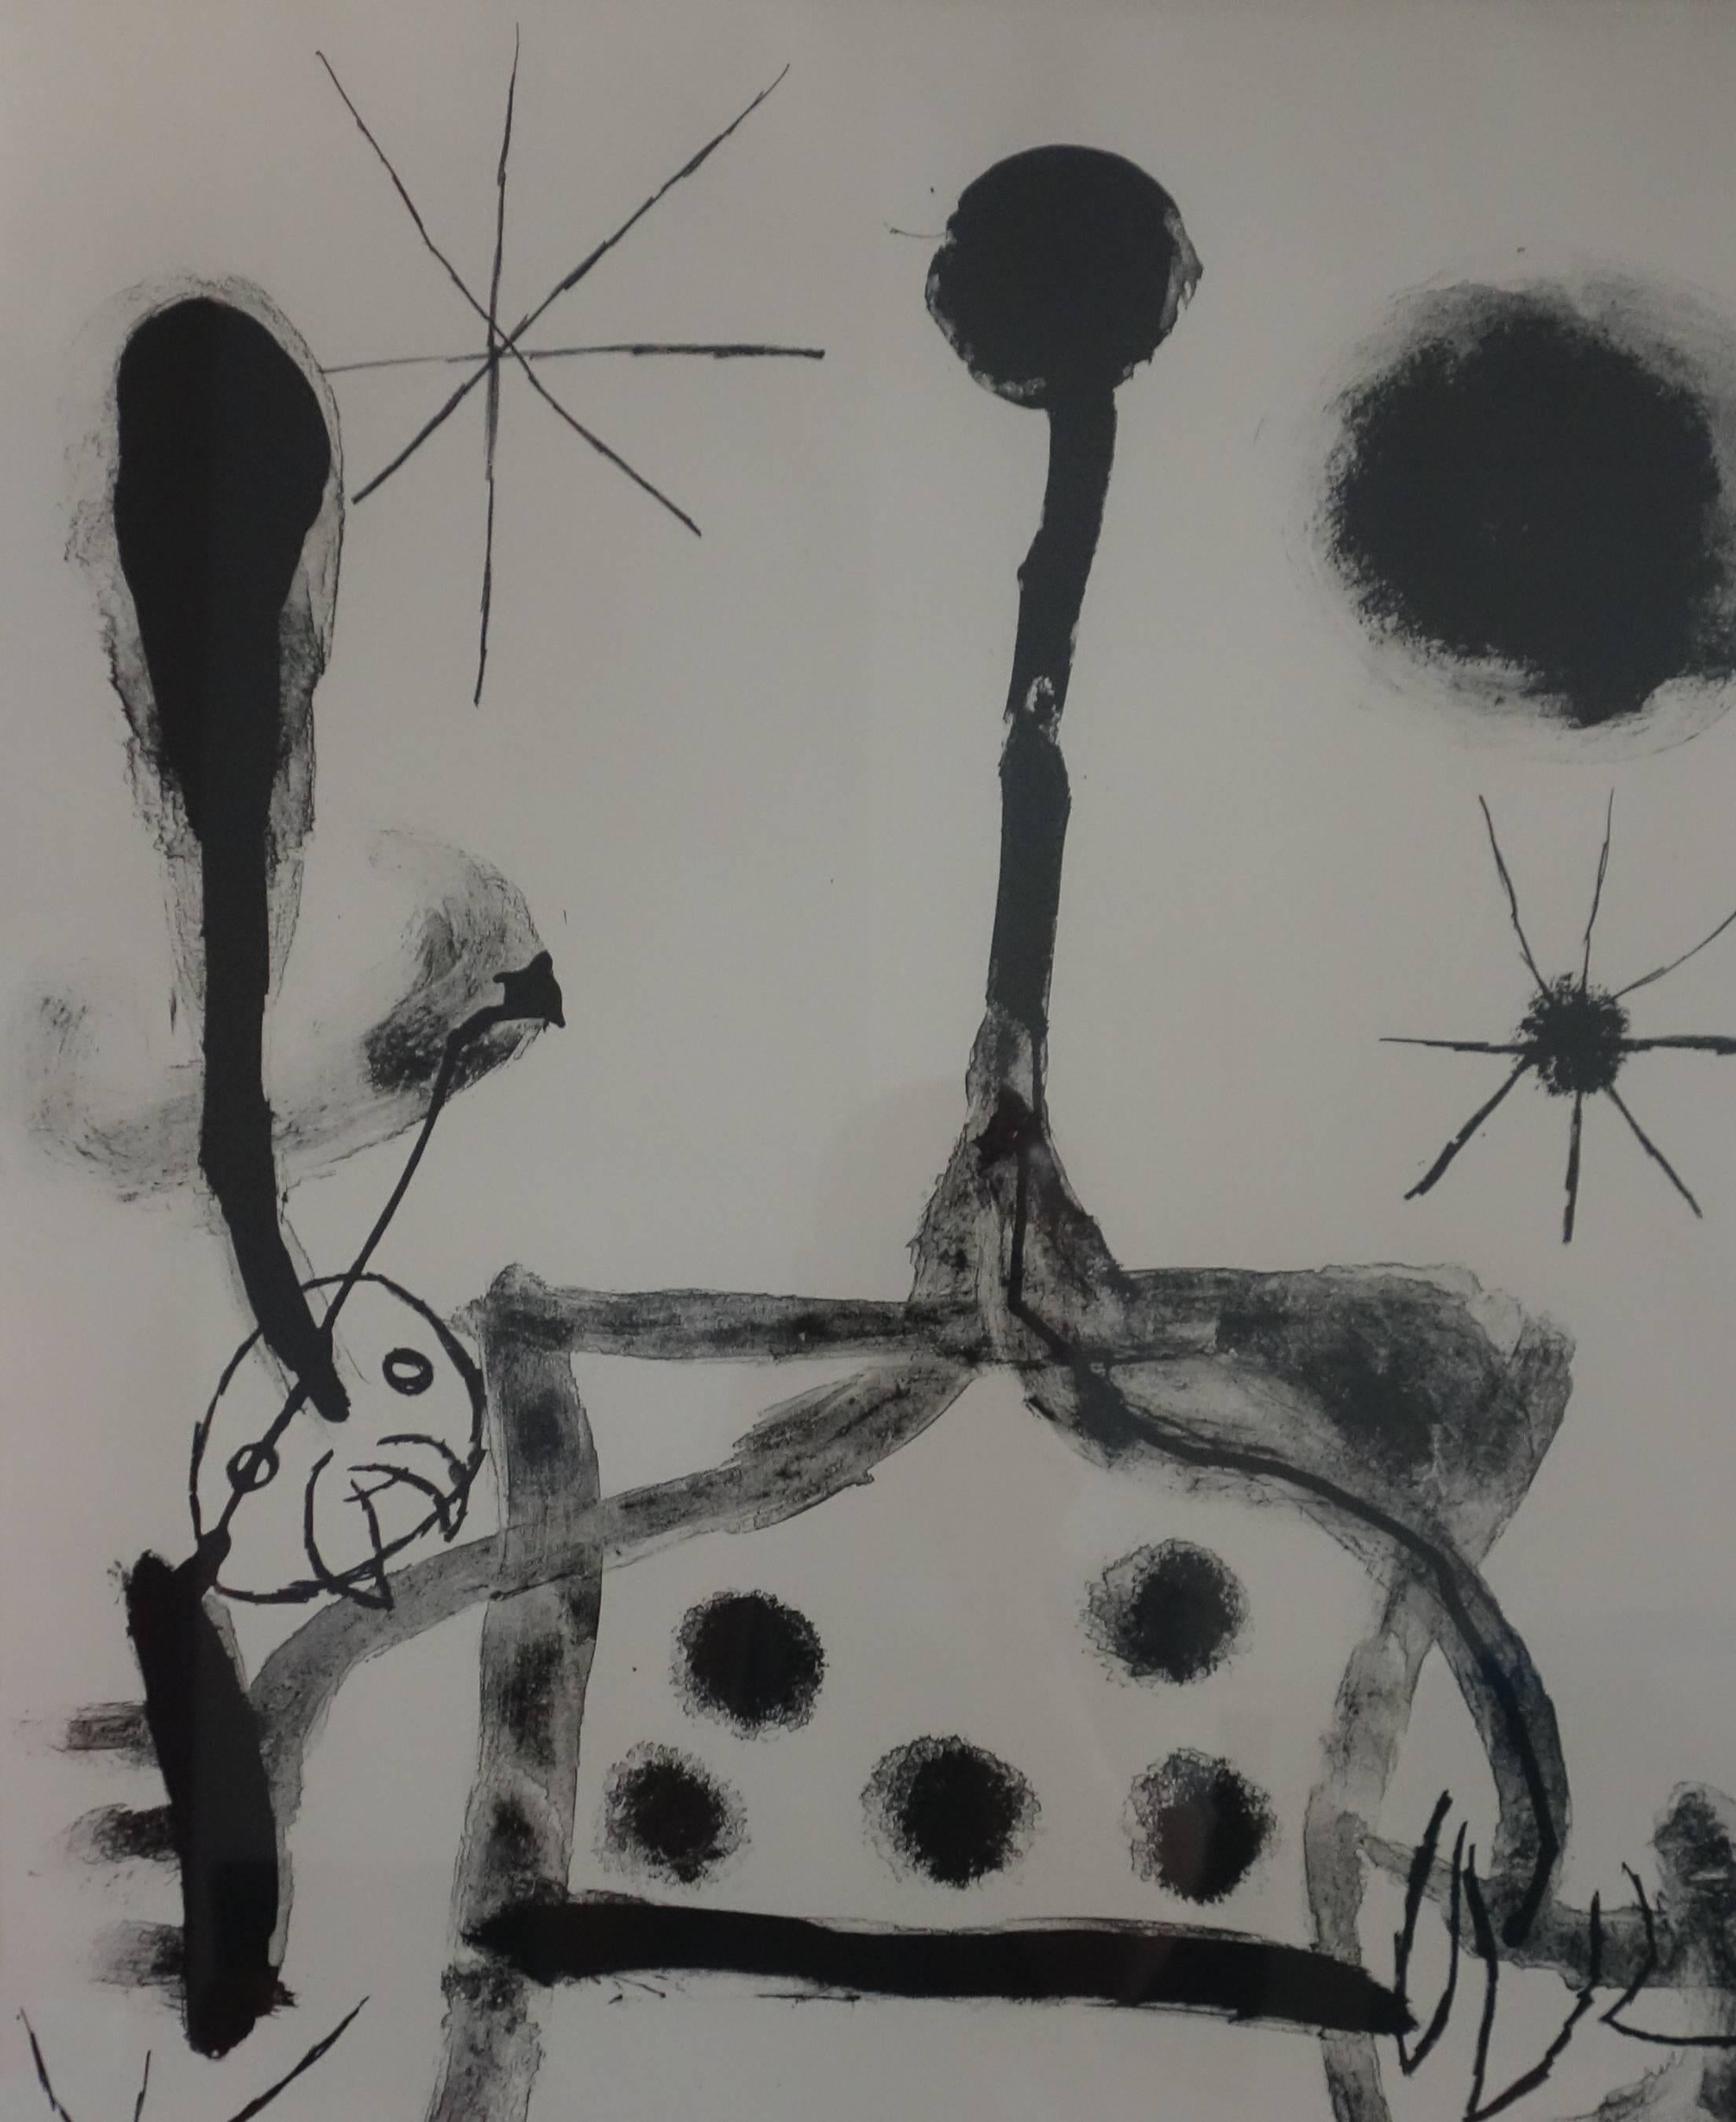 Album 19 : Plate 4, Man Handling his Head - Original handsigned lithograph - Abstract Print by Joan Miró